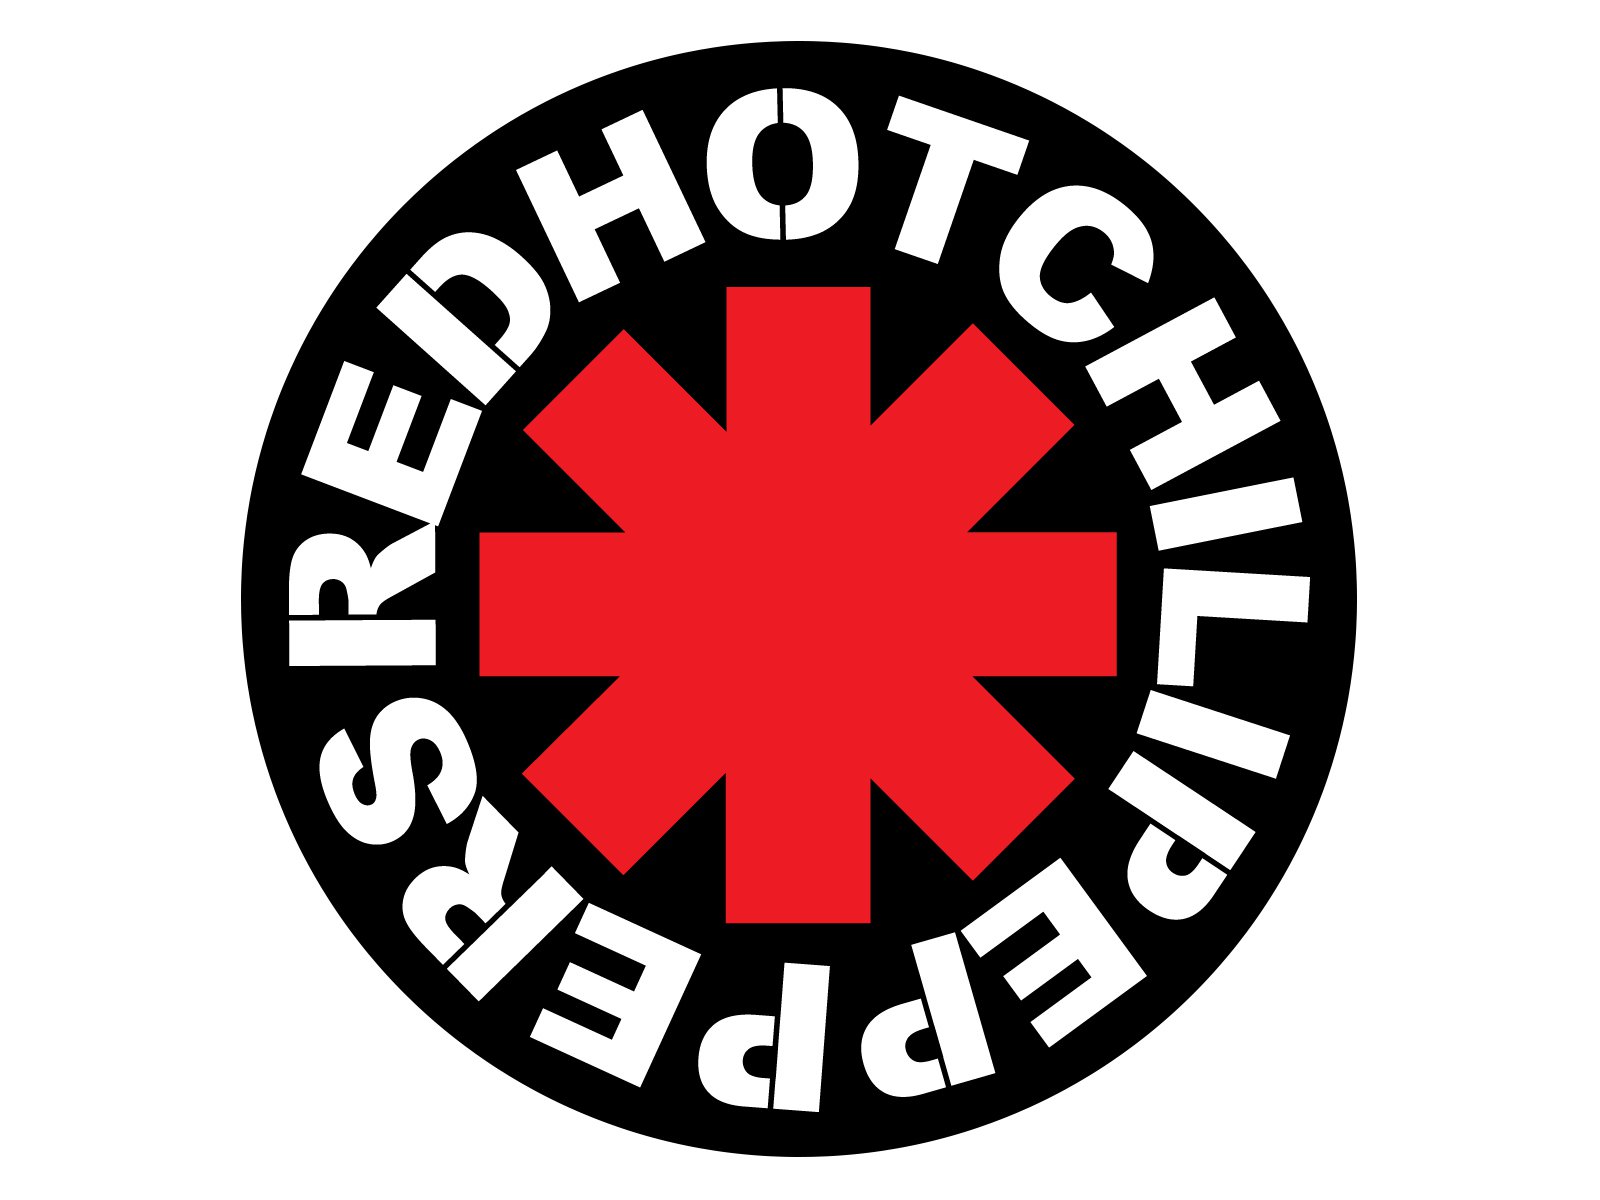 Red hot chili peppers songs download free